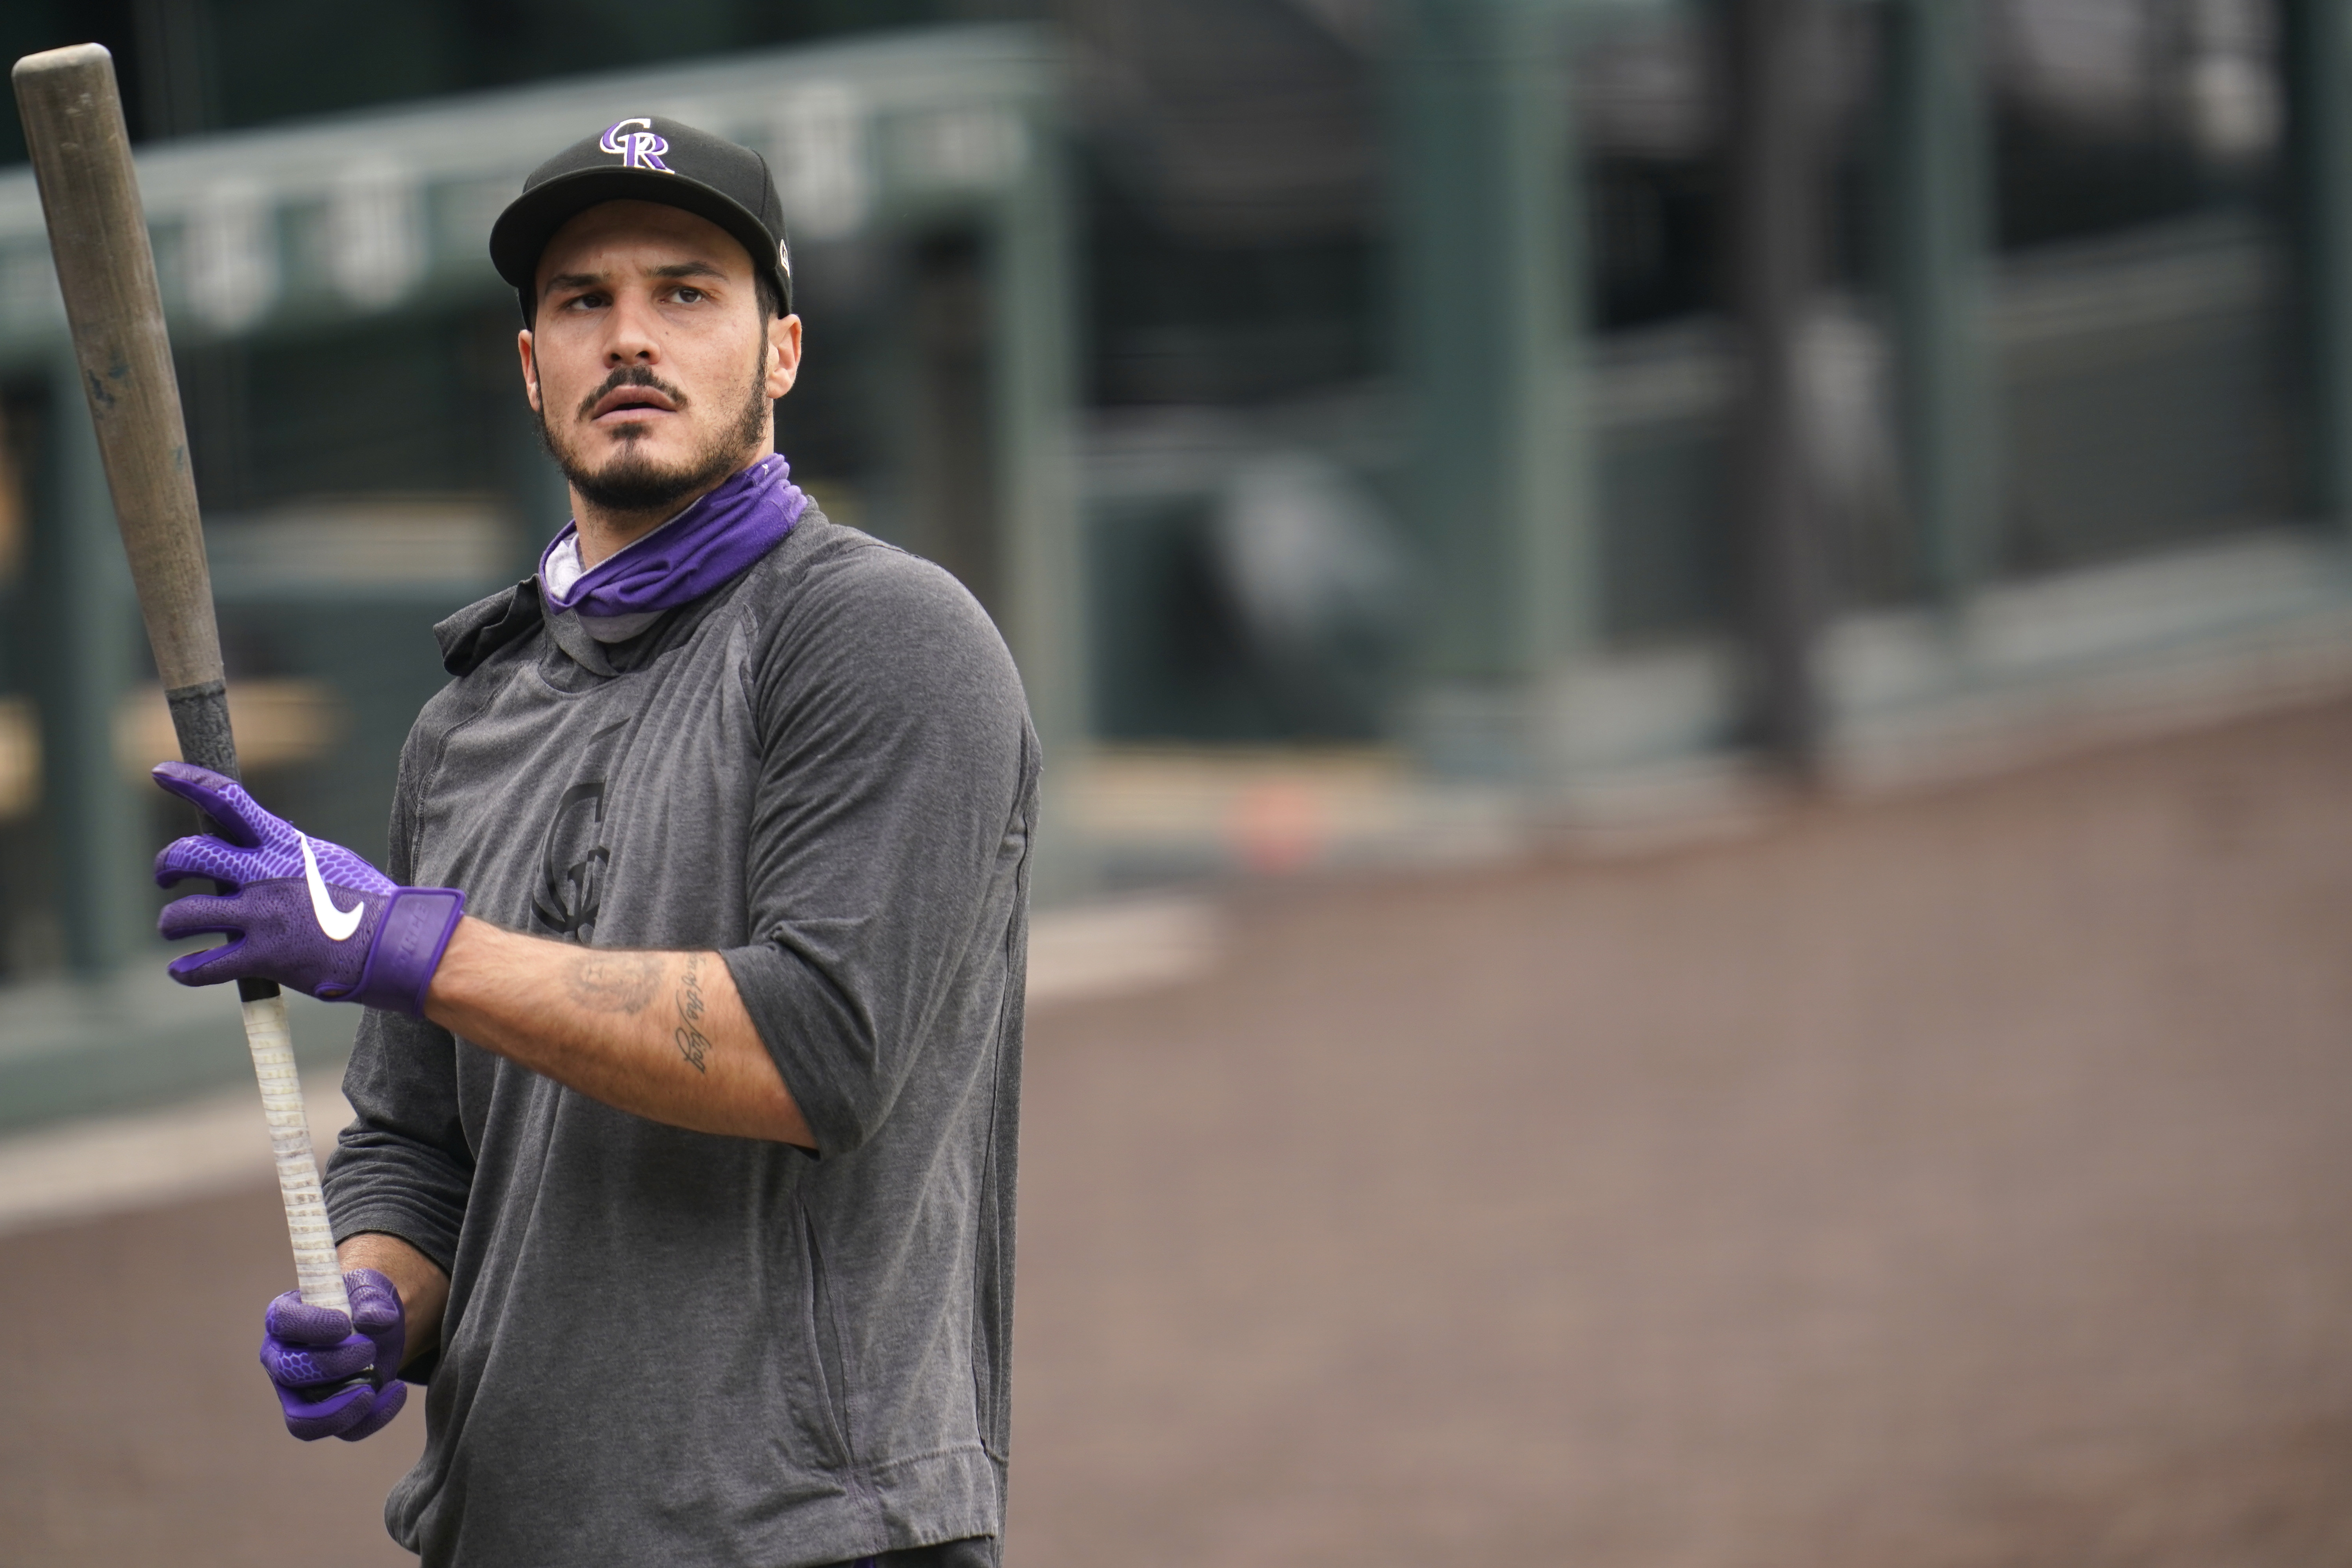 What Rockies Star Nolan Arenado Meant When He Said, 'It Feels Like